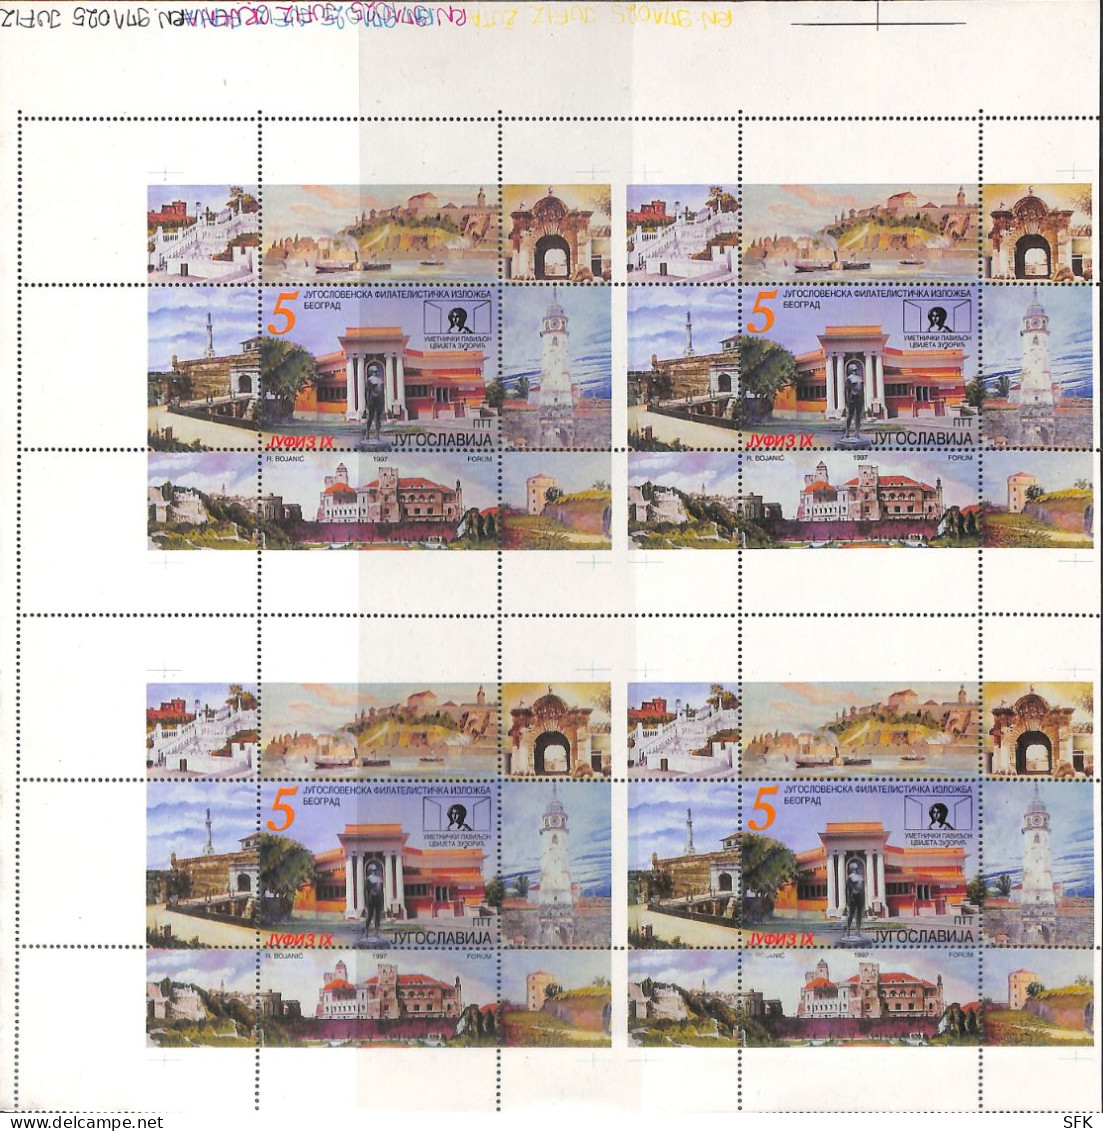 1991 PHILATELIC EXHIBITION JUFIZ IX, Plate WITH 4 MINIATURE SHEETS (BLOCKS) IN Se-tenant.MNH - Imperforates, Proofs & Errors